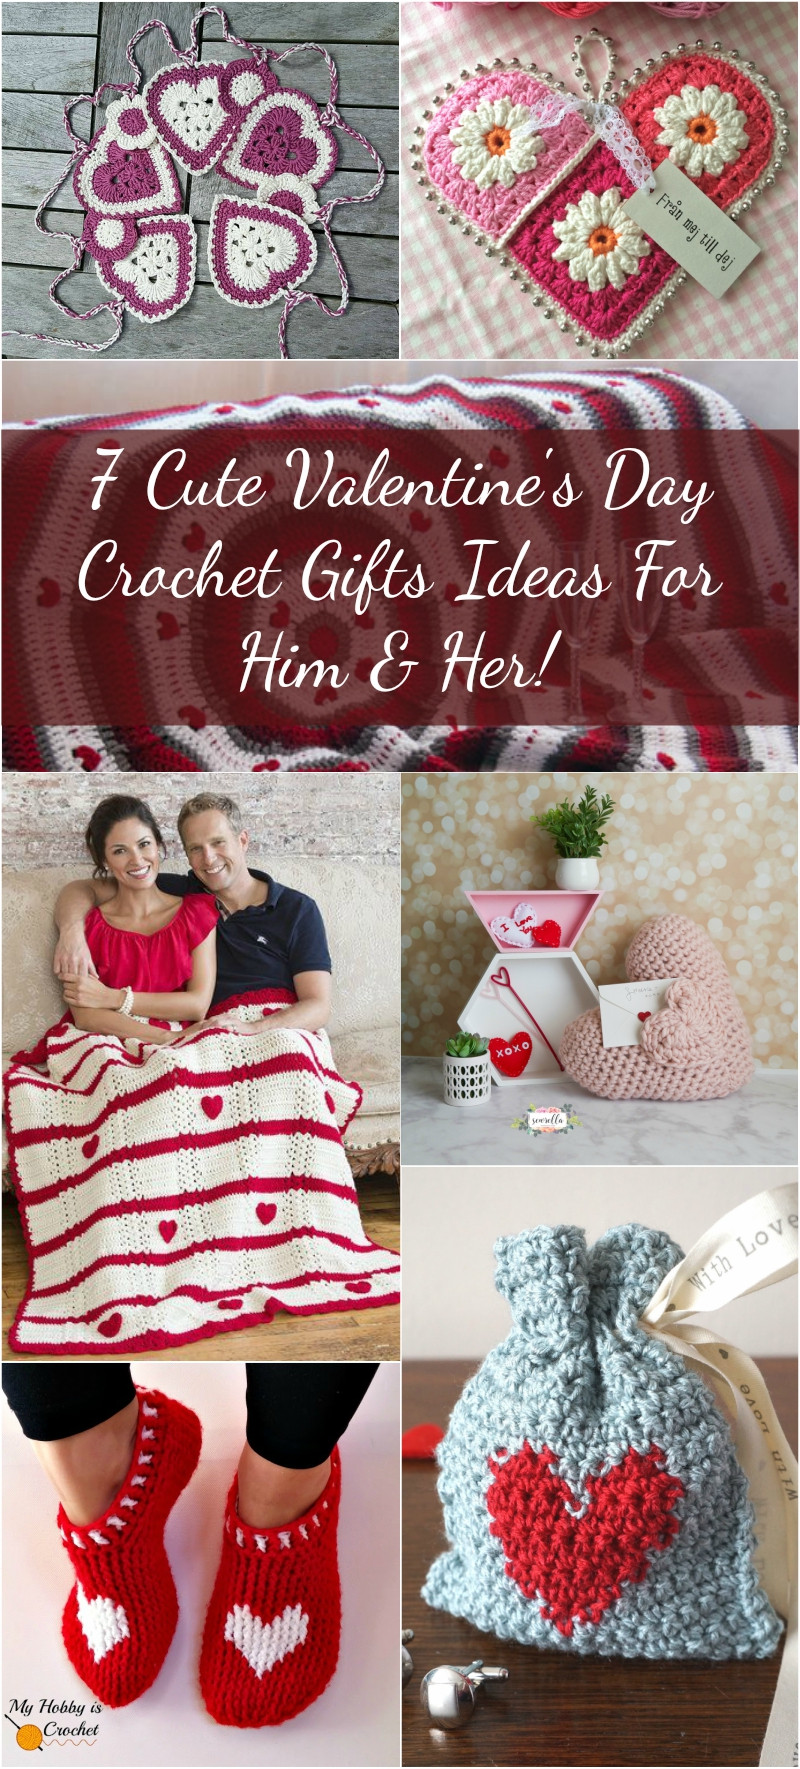 Cute Valentines Day Gifts For Her
 7 Cute Valentine s Day Crochet Gifts Ideas For Him & Her